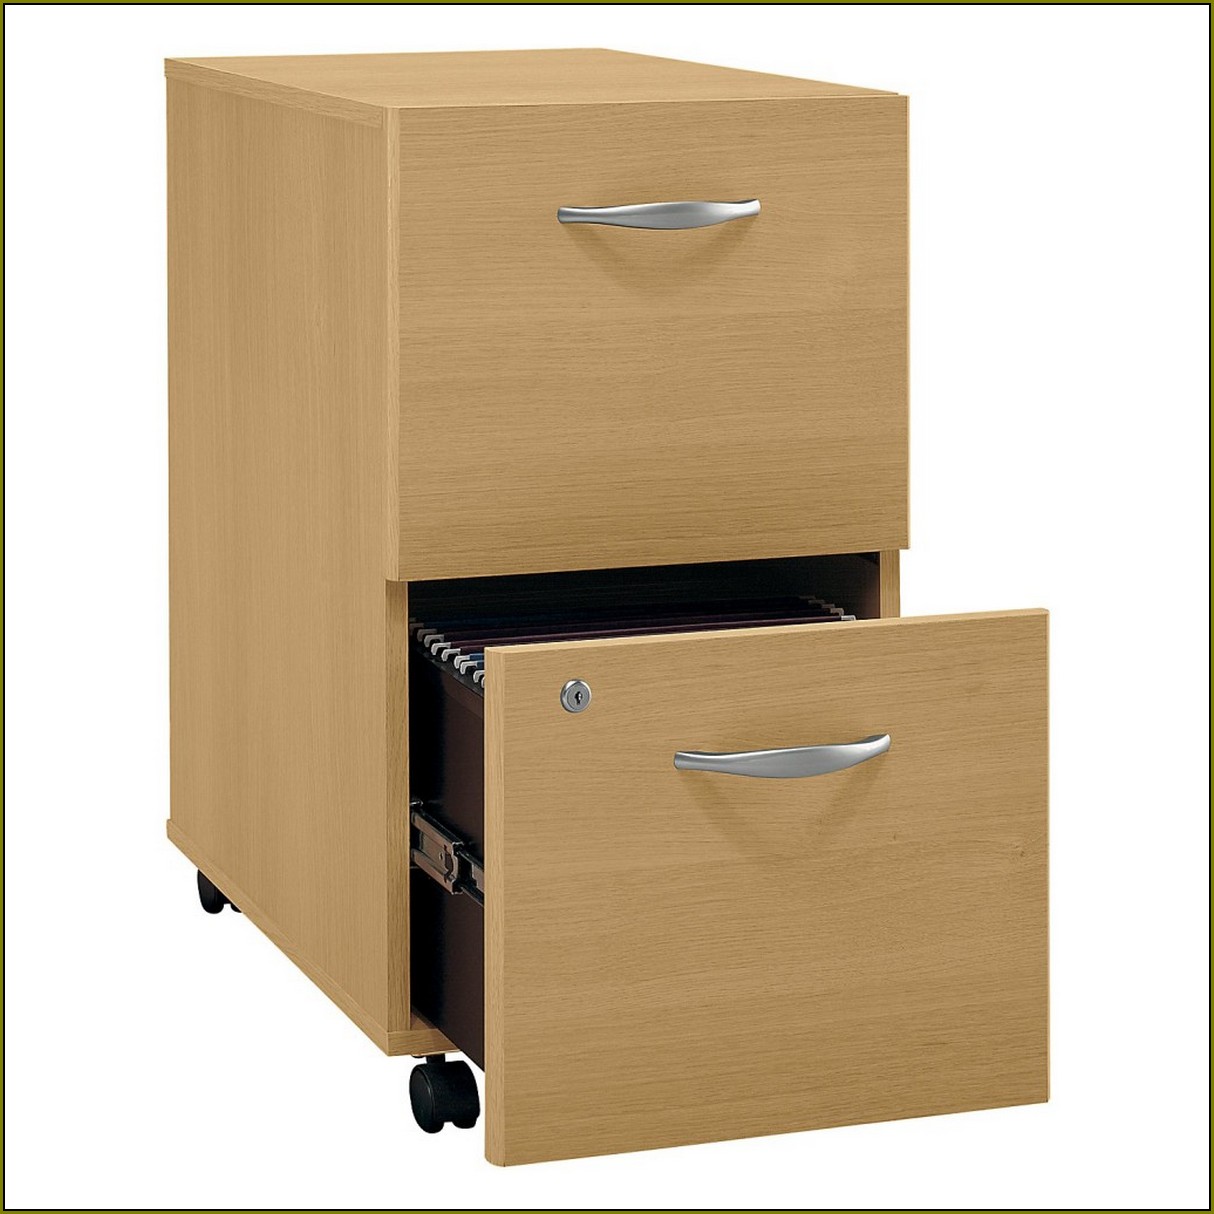 2 Drawer File Cabinets For The Home